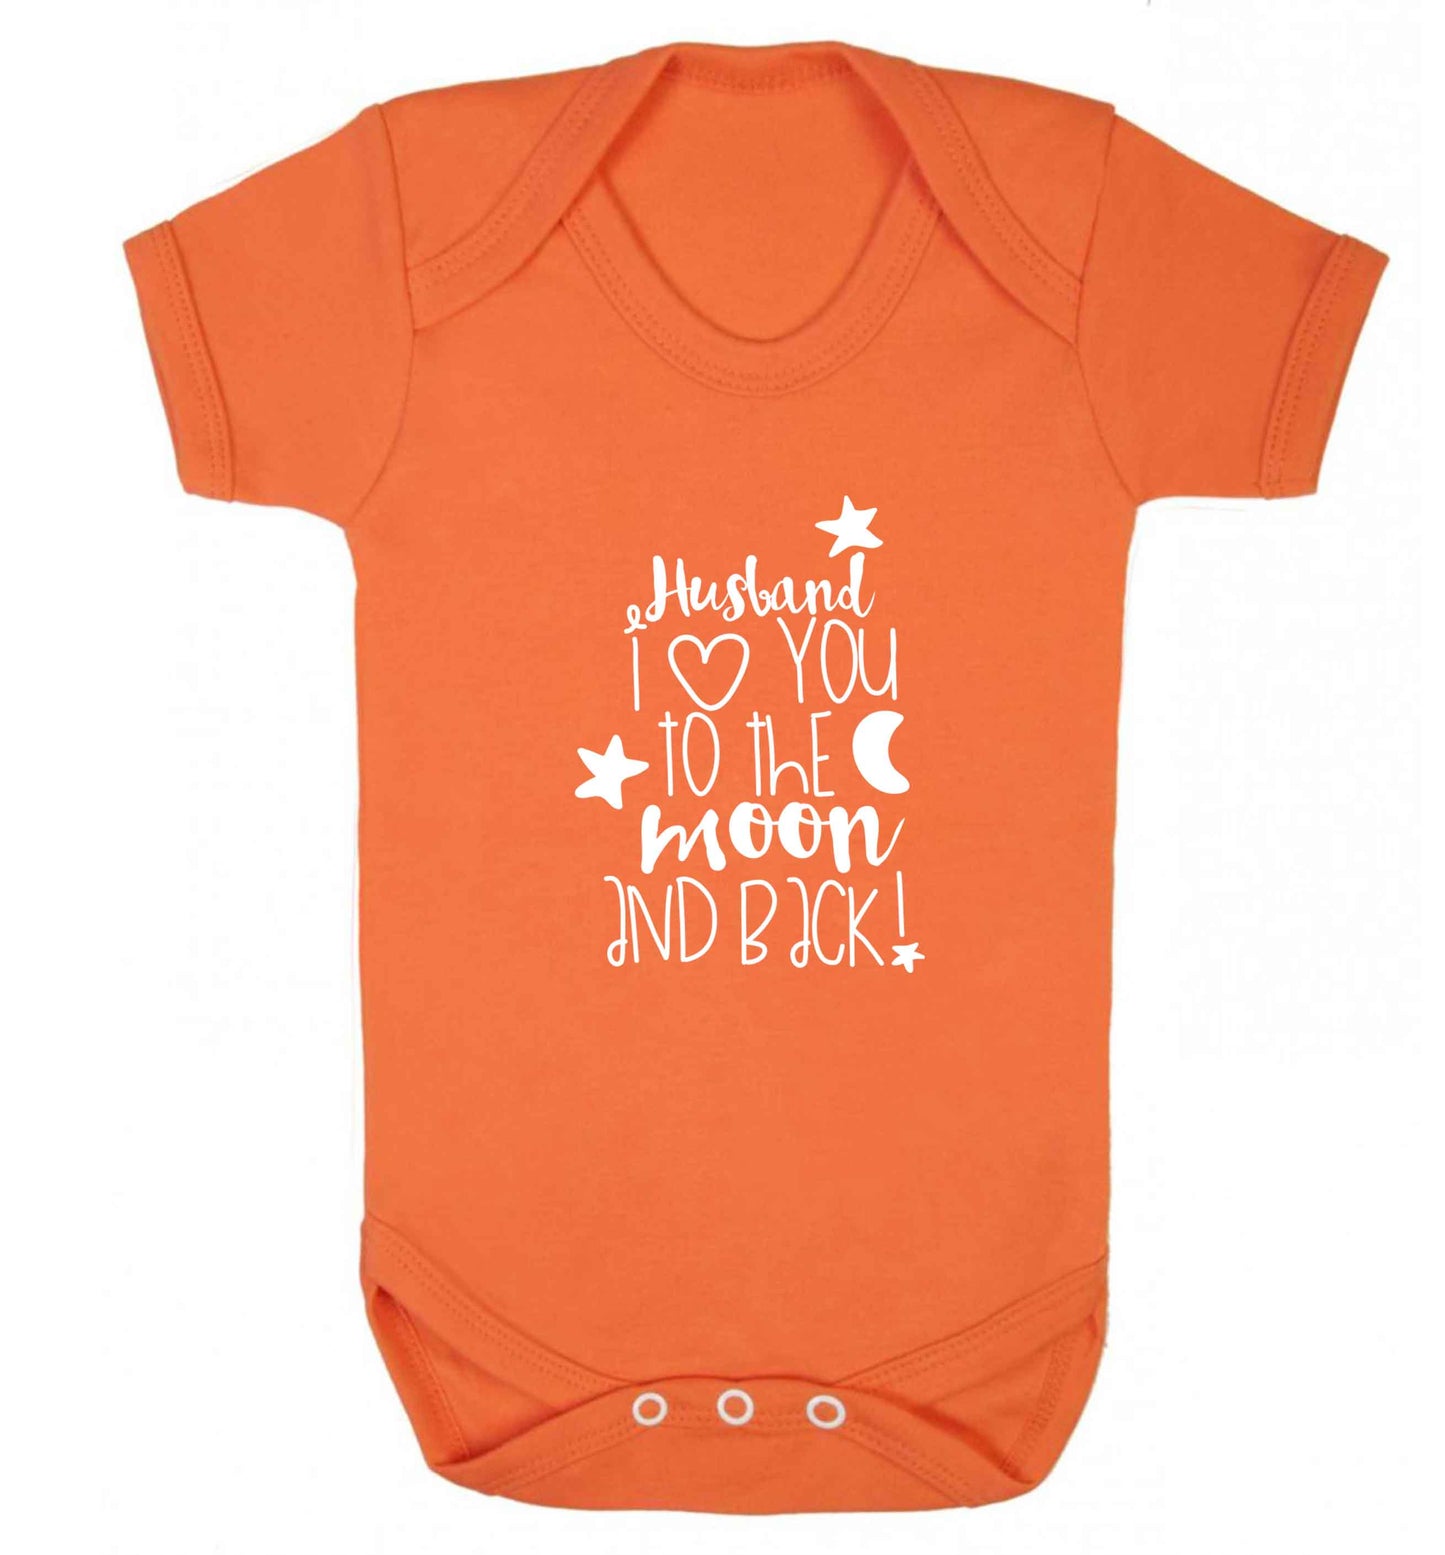 Husband I love you to the moon and back baby vest orange 18-24 months